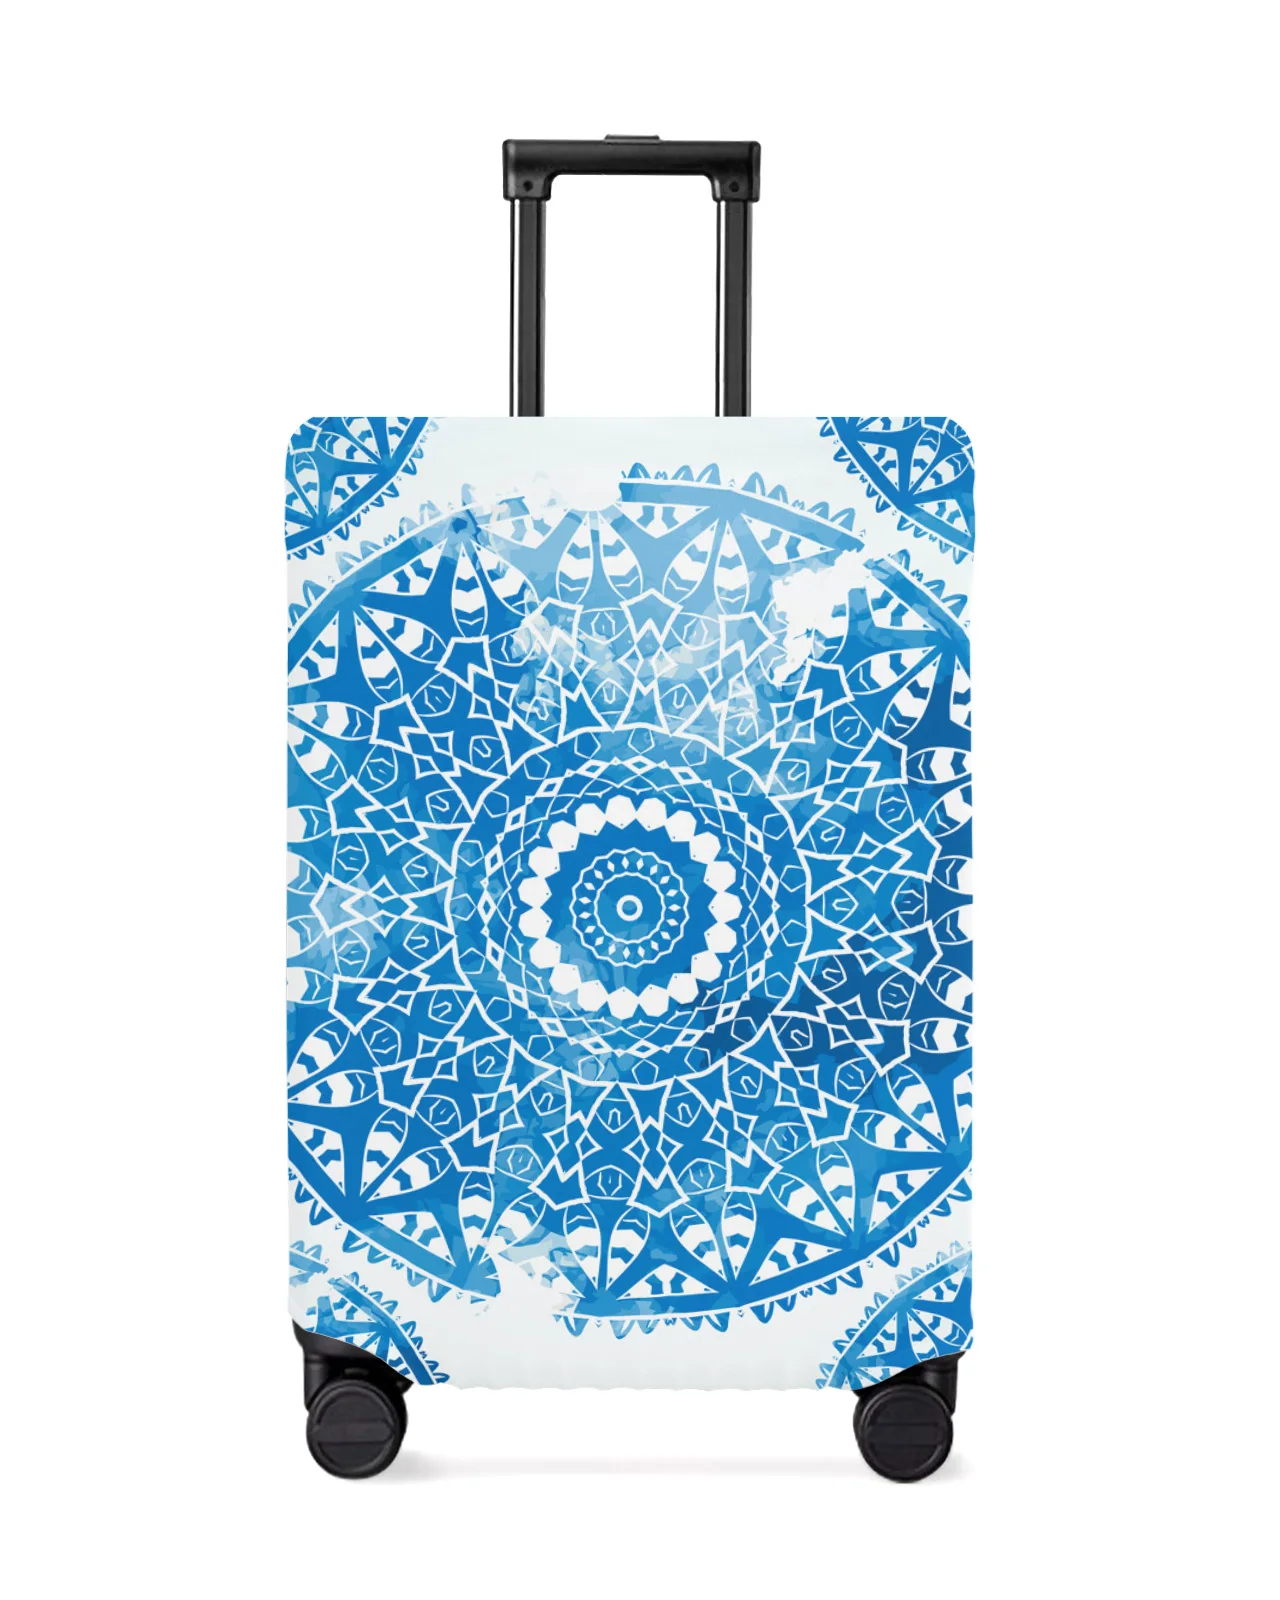 mandala-retro-travel-luggage-protective-cover-for-18-32-inch-travel-accessories-suitcase-elastic-dust-duffle-case-protect-sleeve